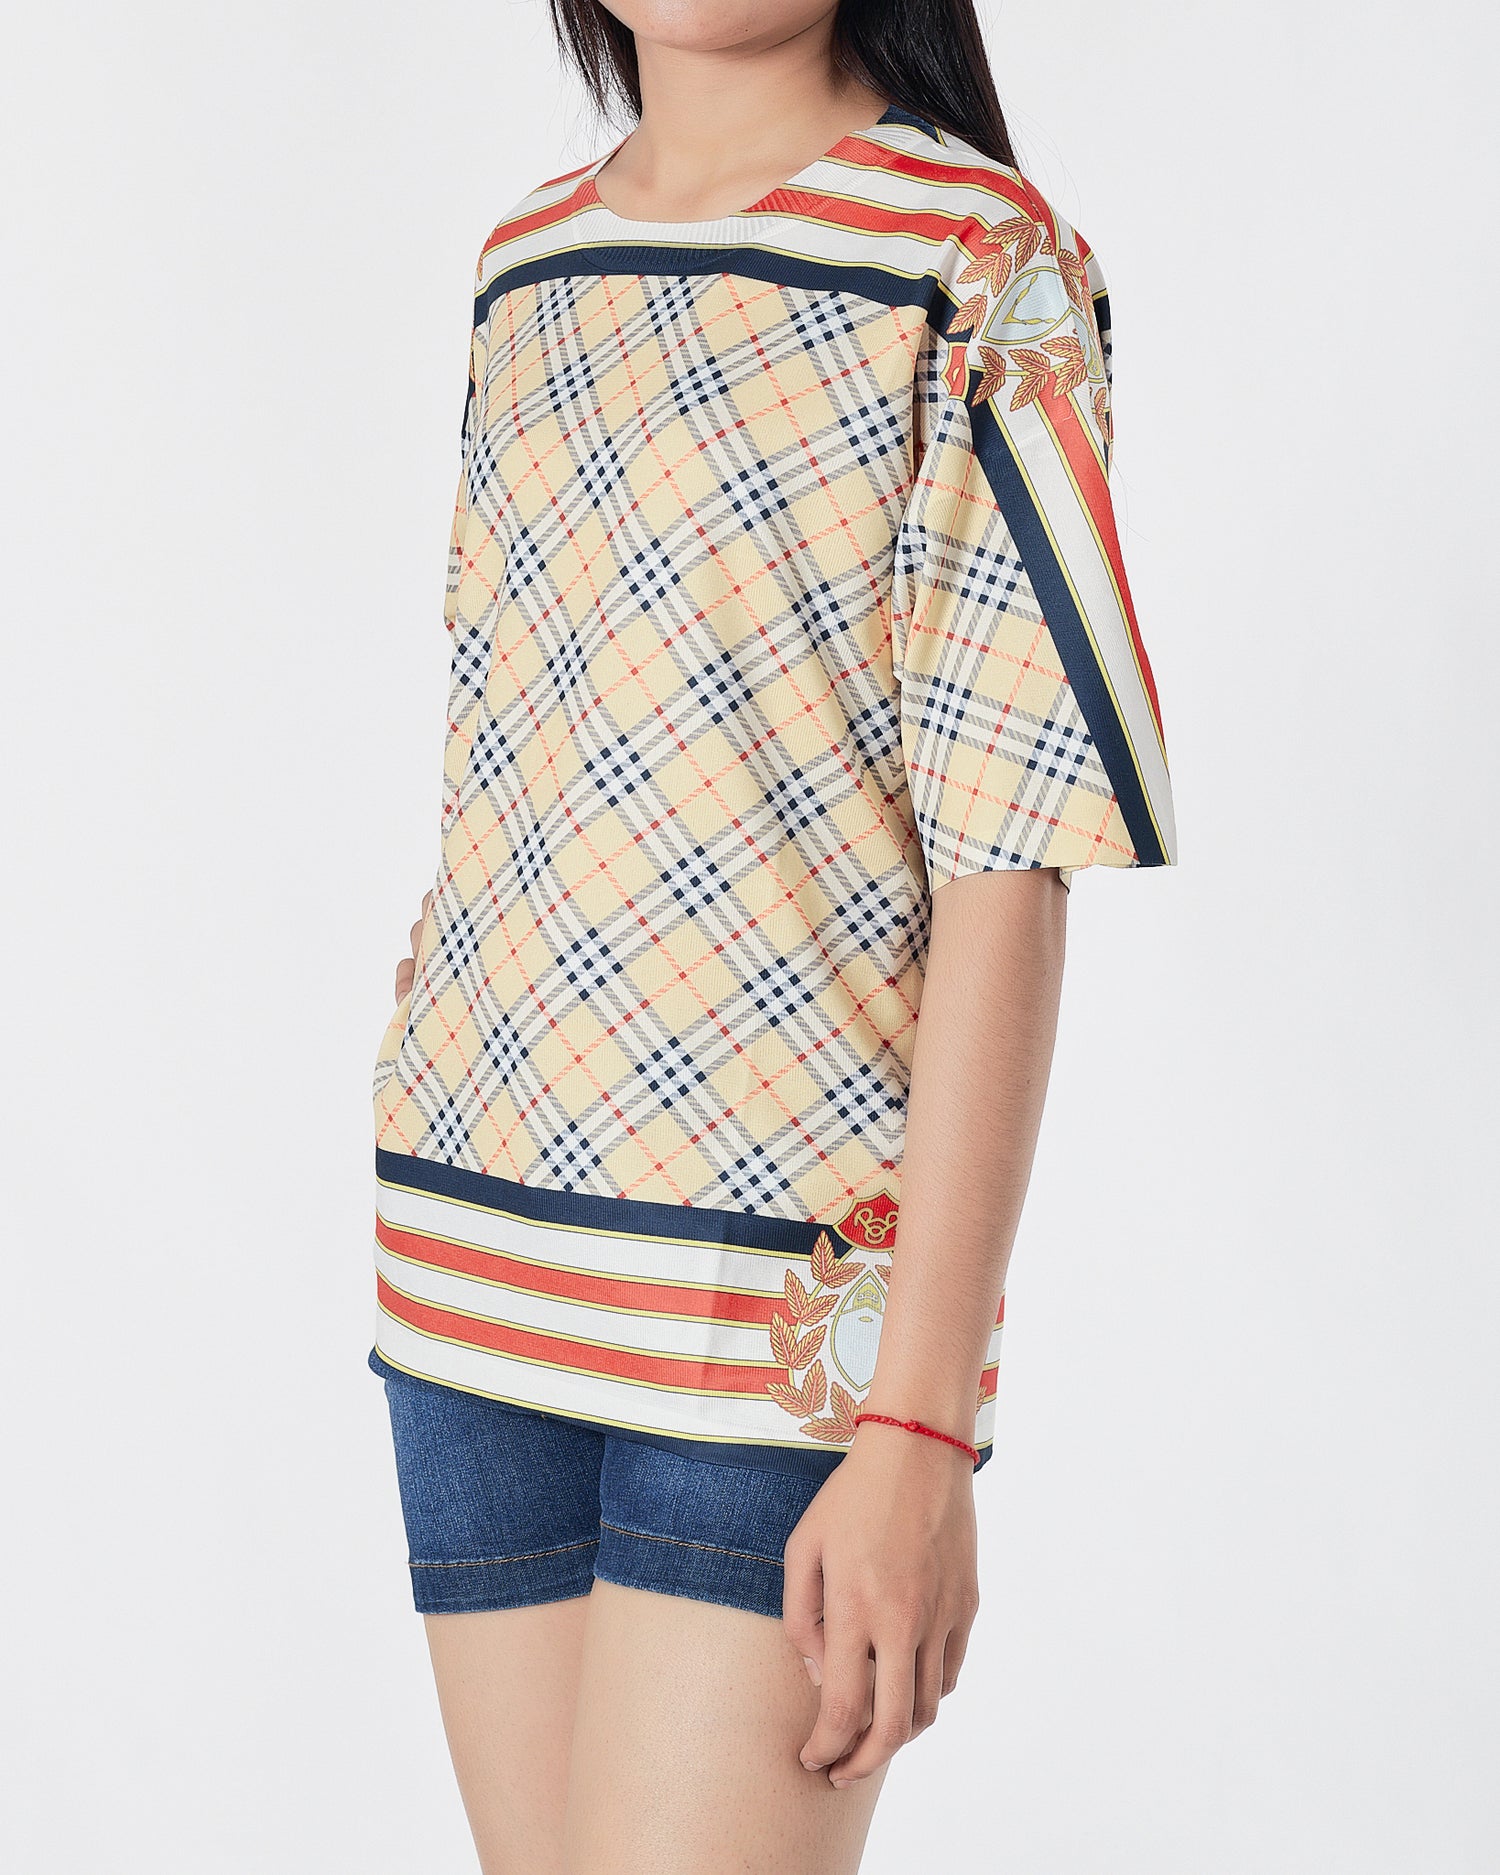 Checked Over Printed Lady T-Shirt 15.90